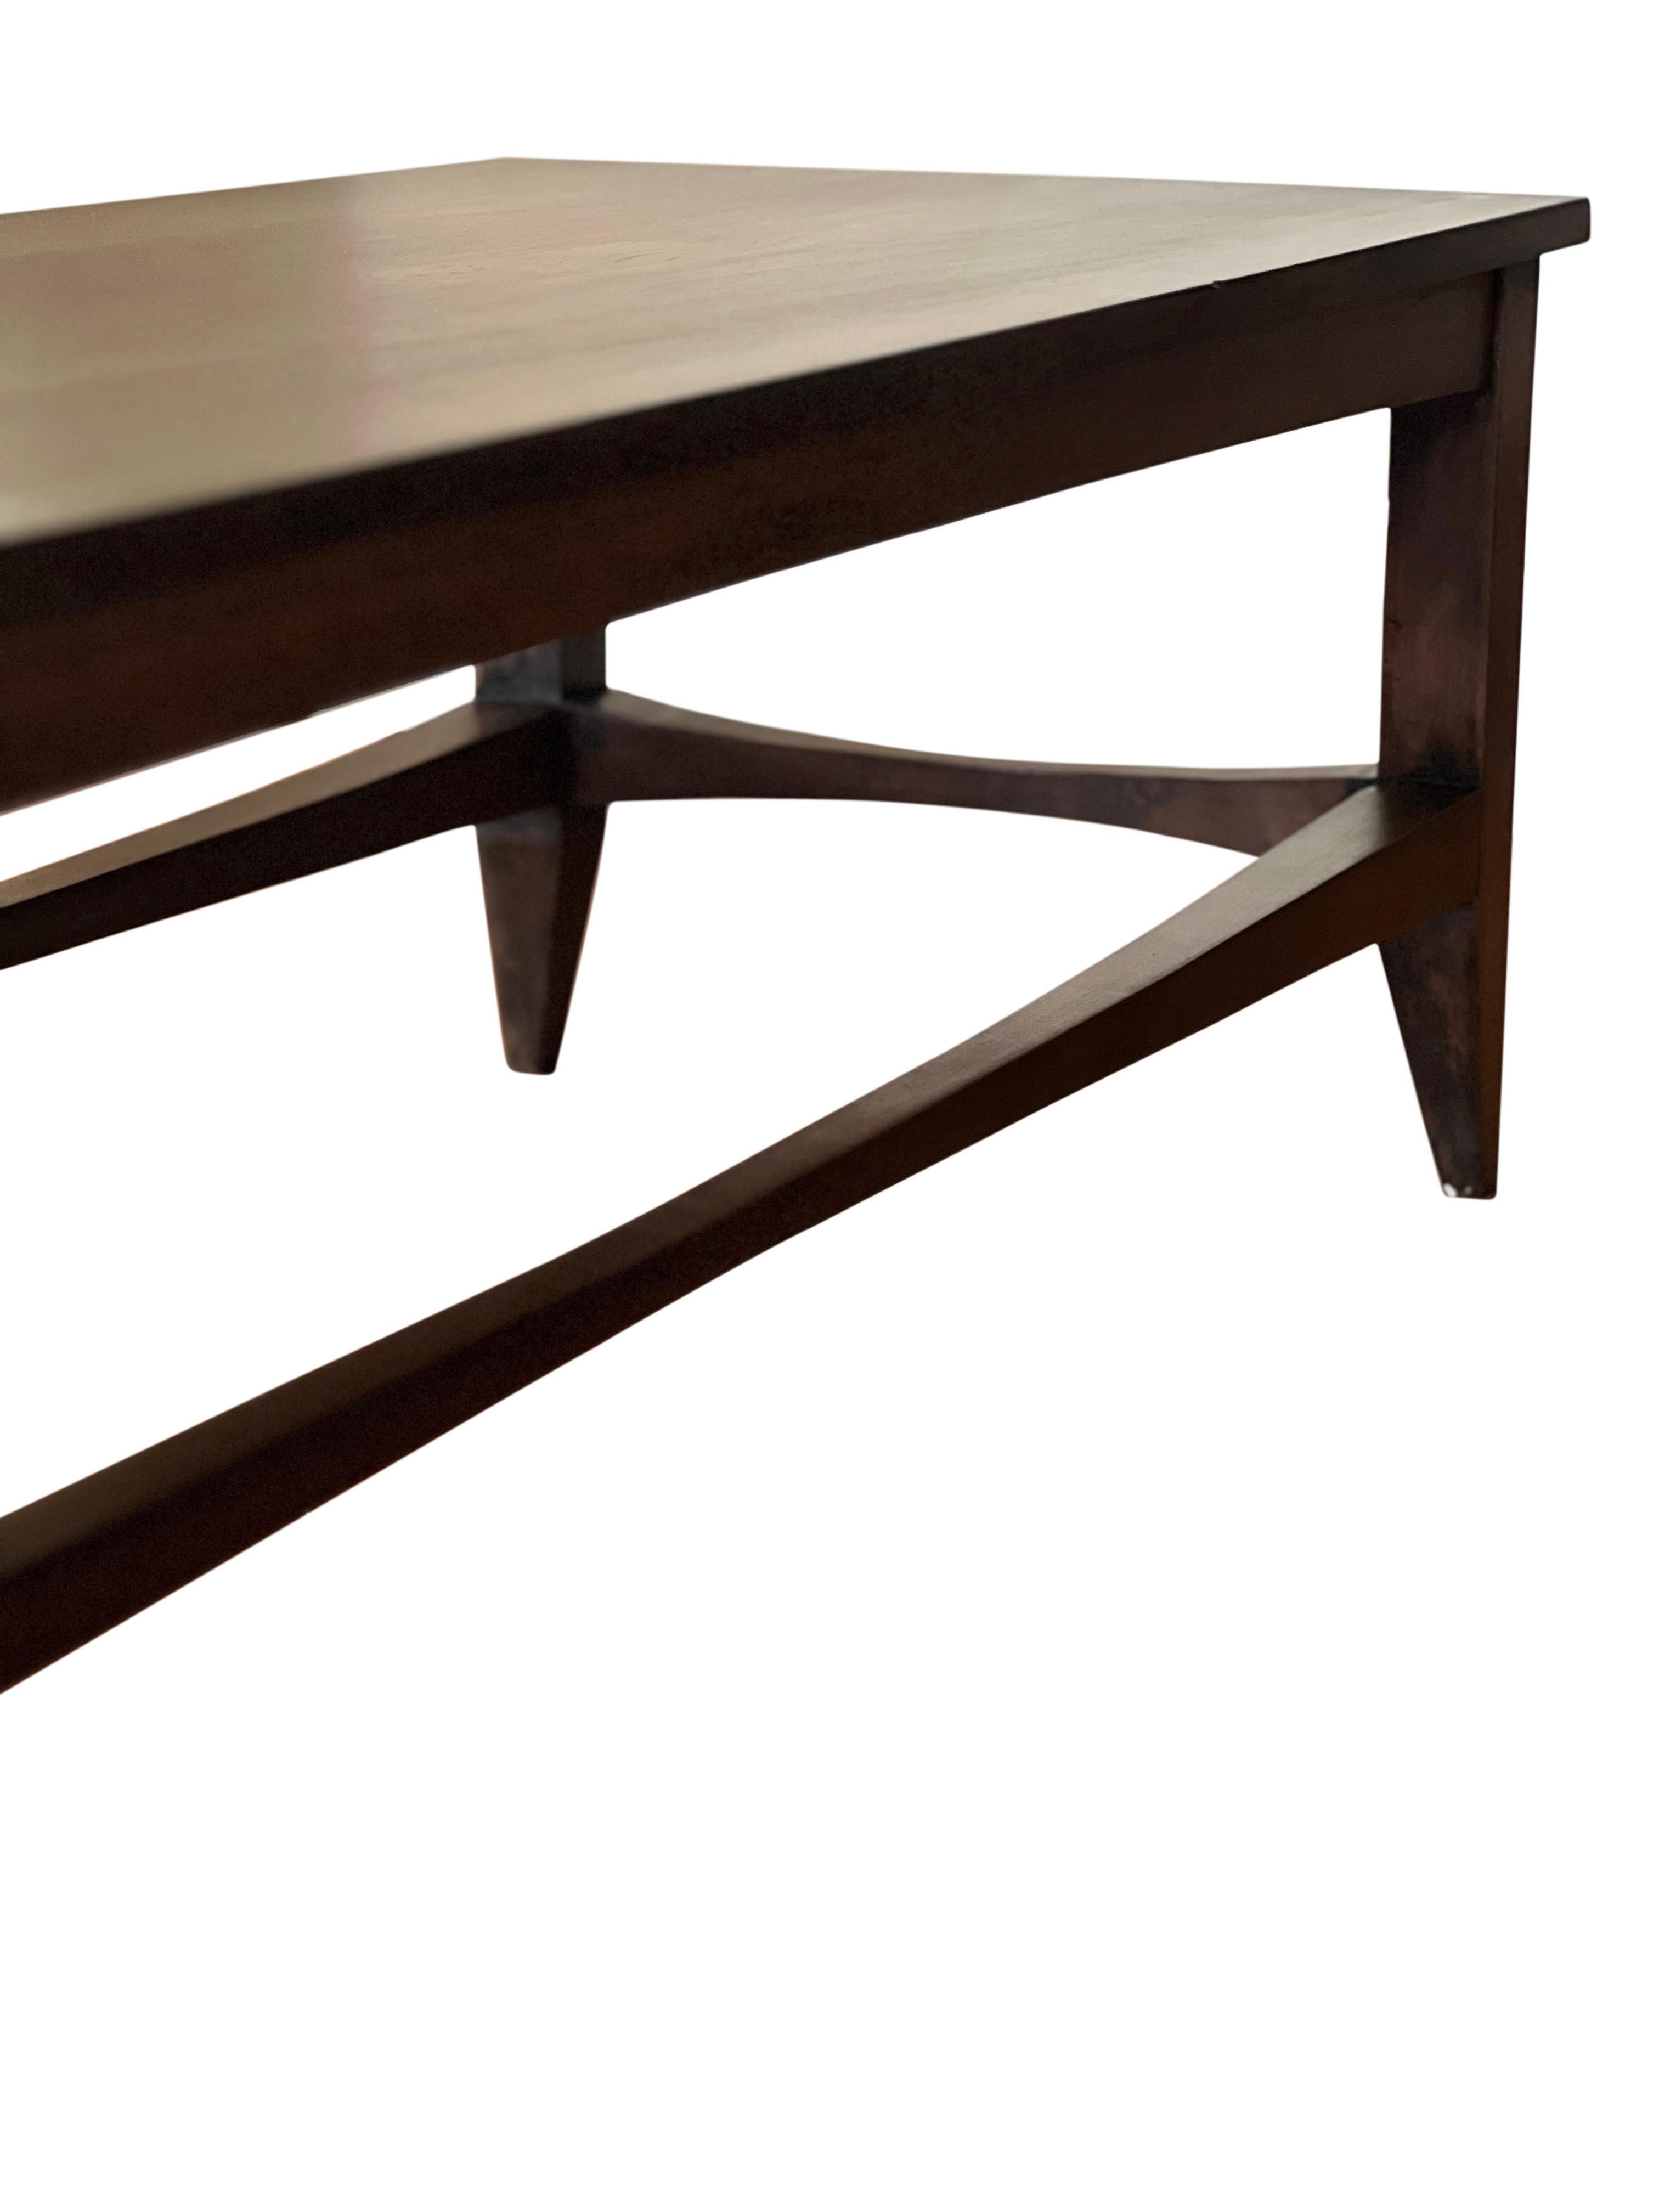 20th Century Midcentury Scandinavian Walnut Coffee Table, Refinished For Sale